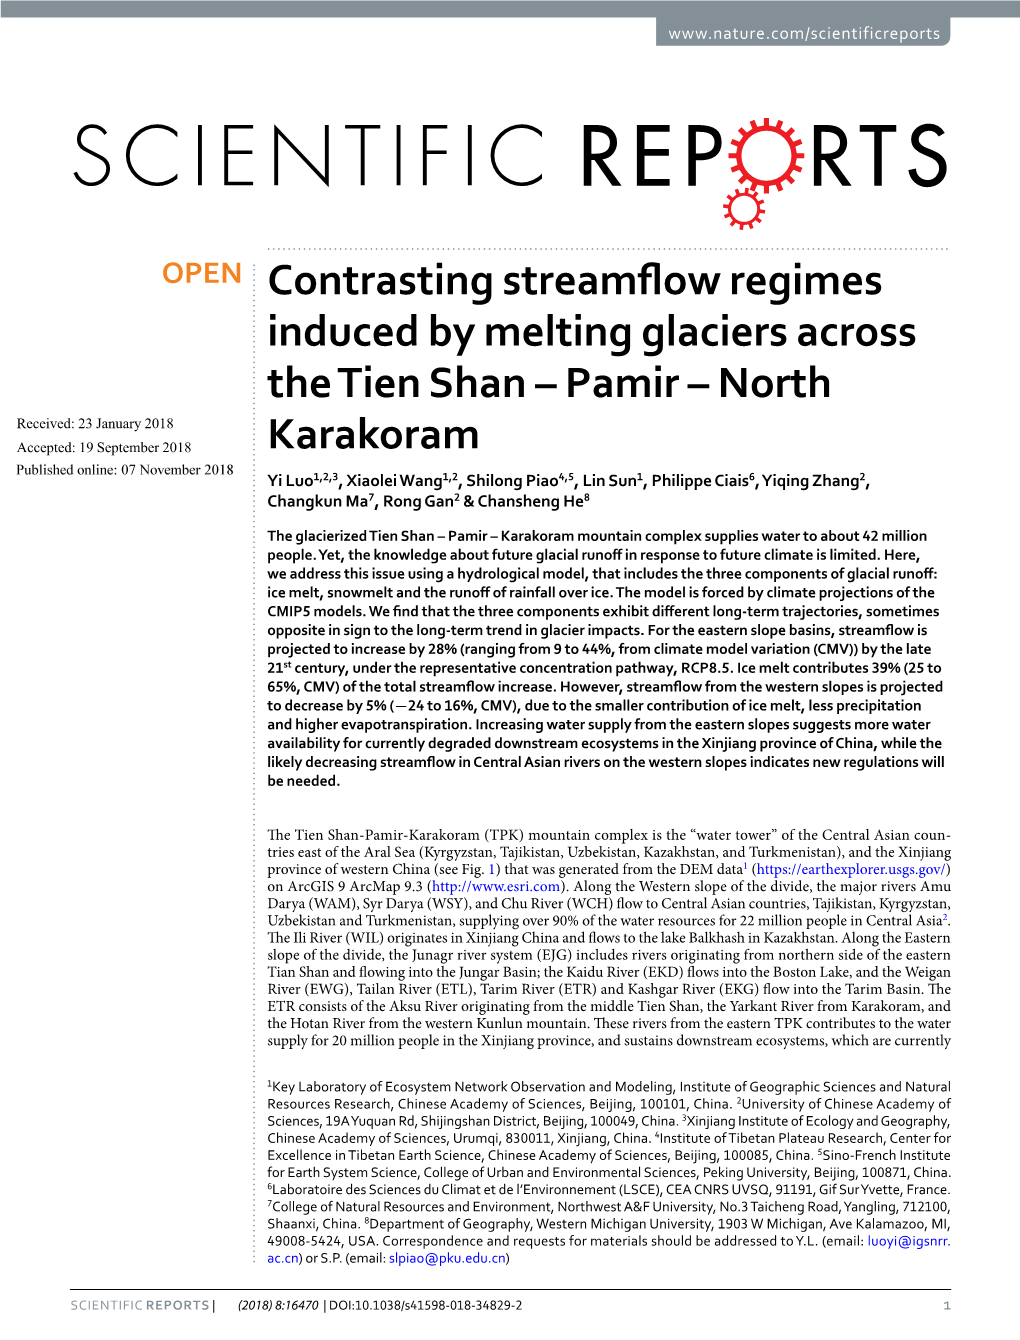 Contrasting Streamflow Regimes Induced by Melting Glaciers Across